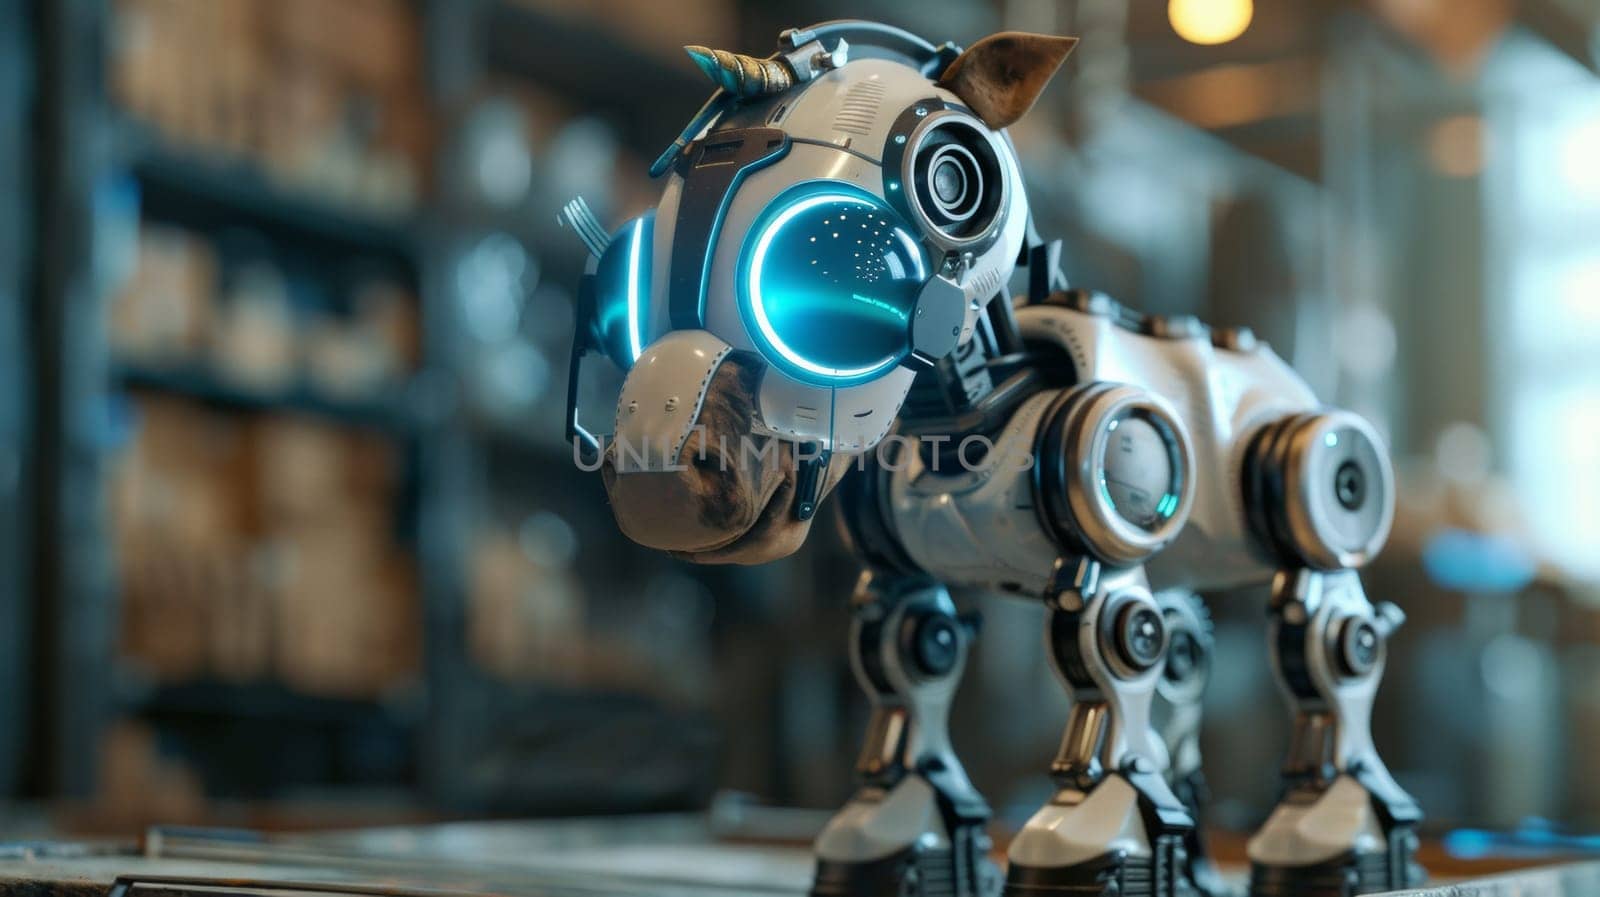 A robot horse with glowing eyes on a table in front of books